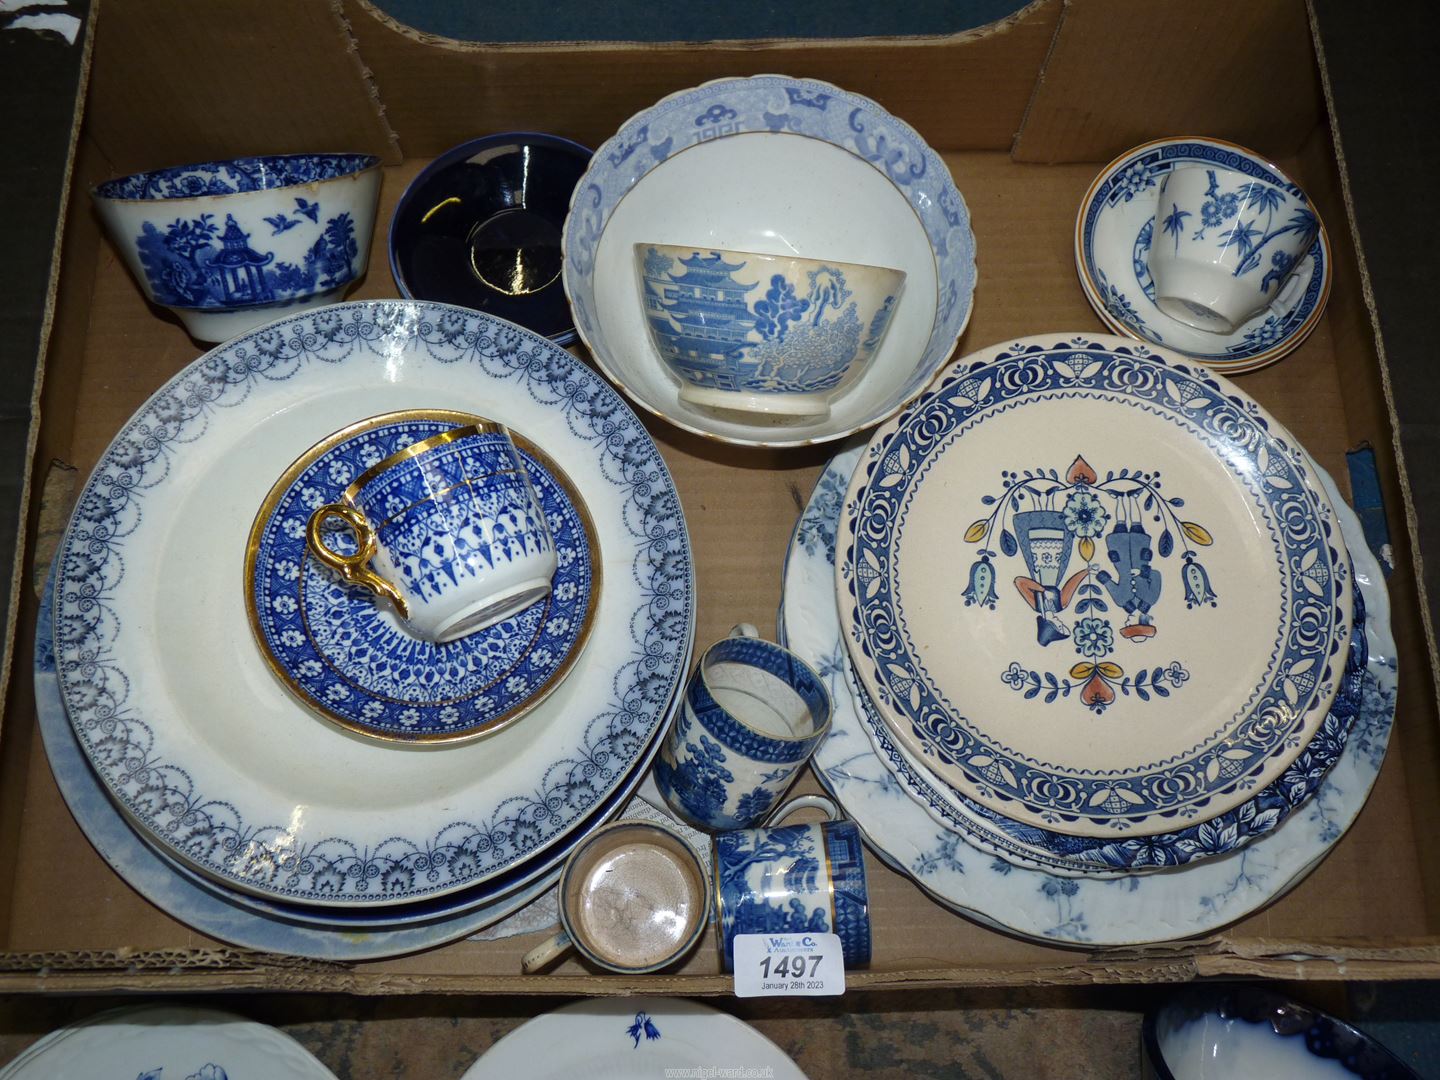 A quantity of blue and white china including Old Chelsea, Myotts, Staffordshire, Booth's : plates, - Image 2 of 2